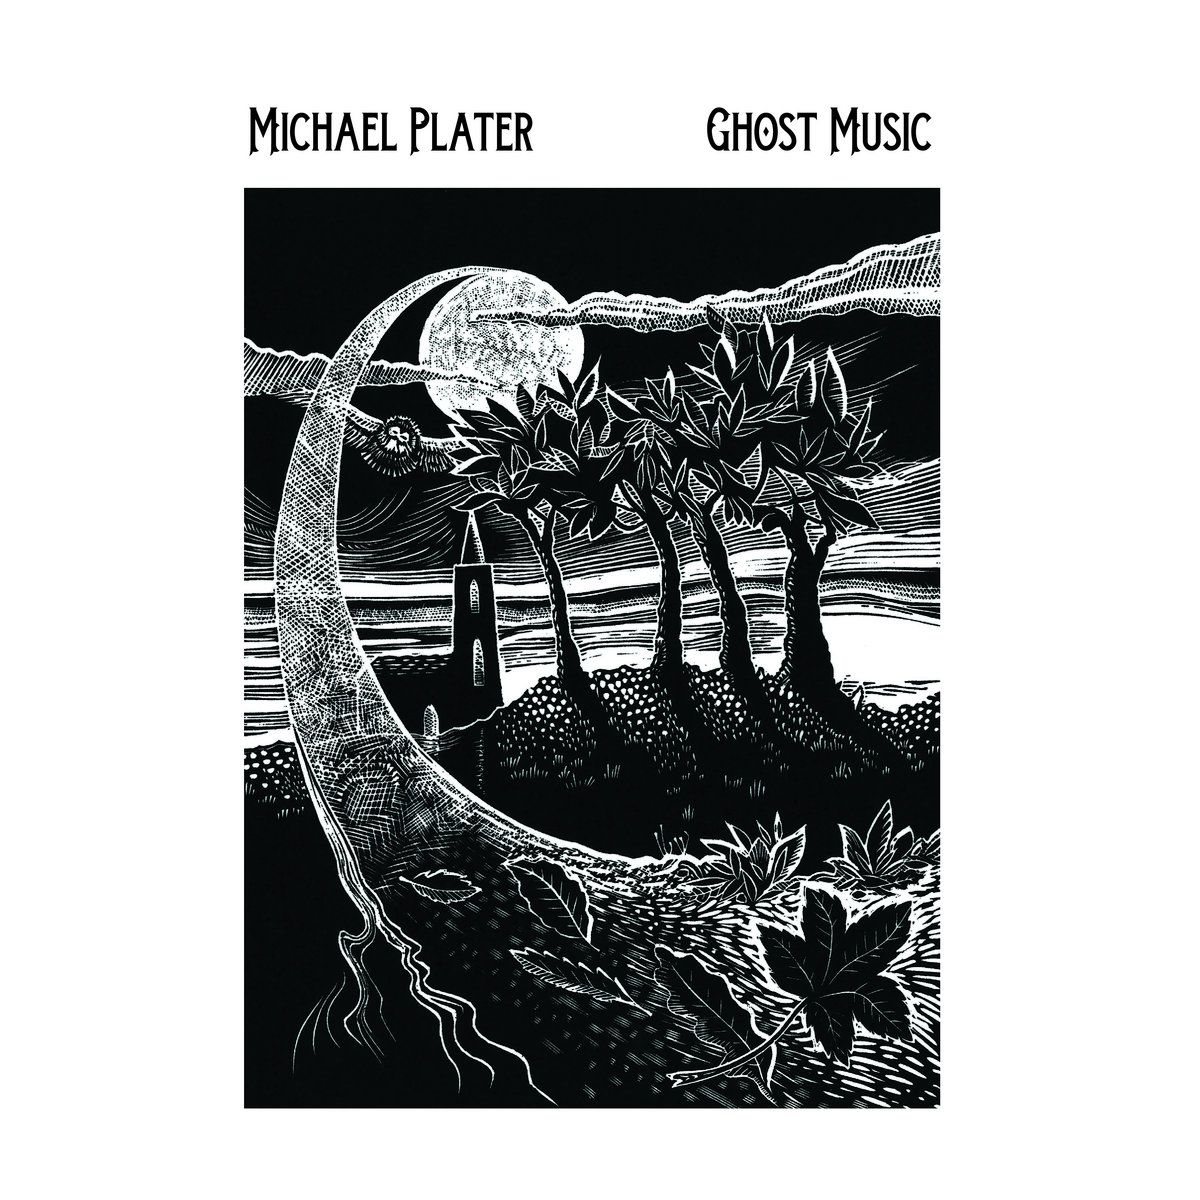 Australian Indie Noir: Michael Plater’s Psychedelic Ghost Music